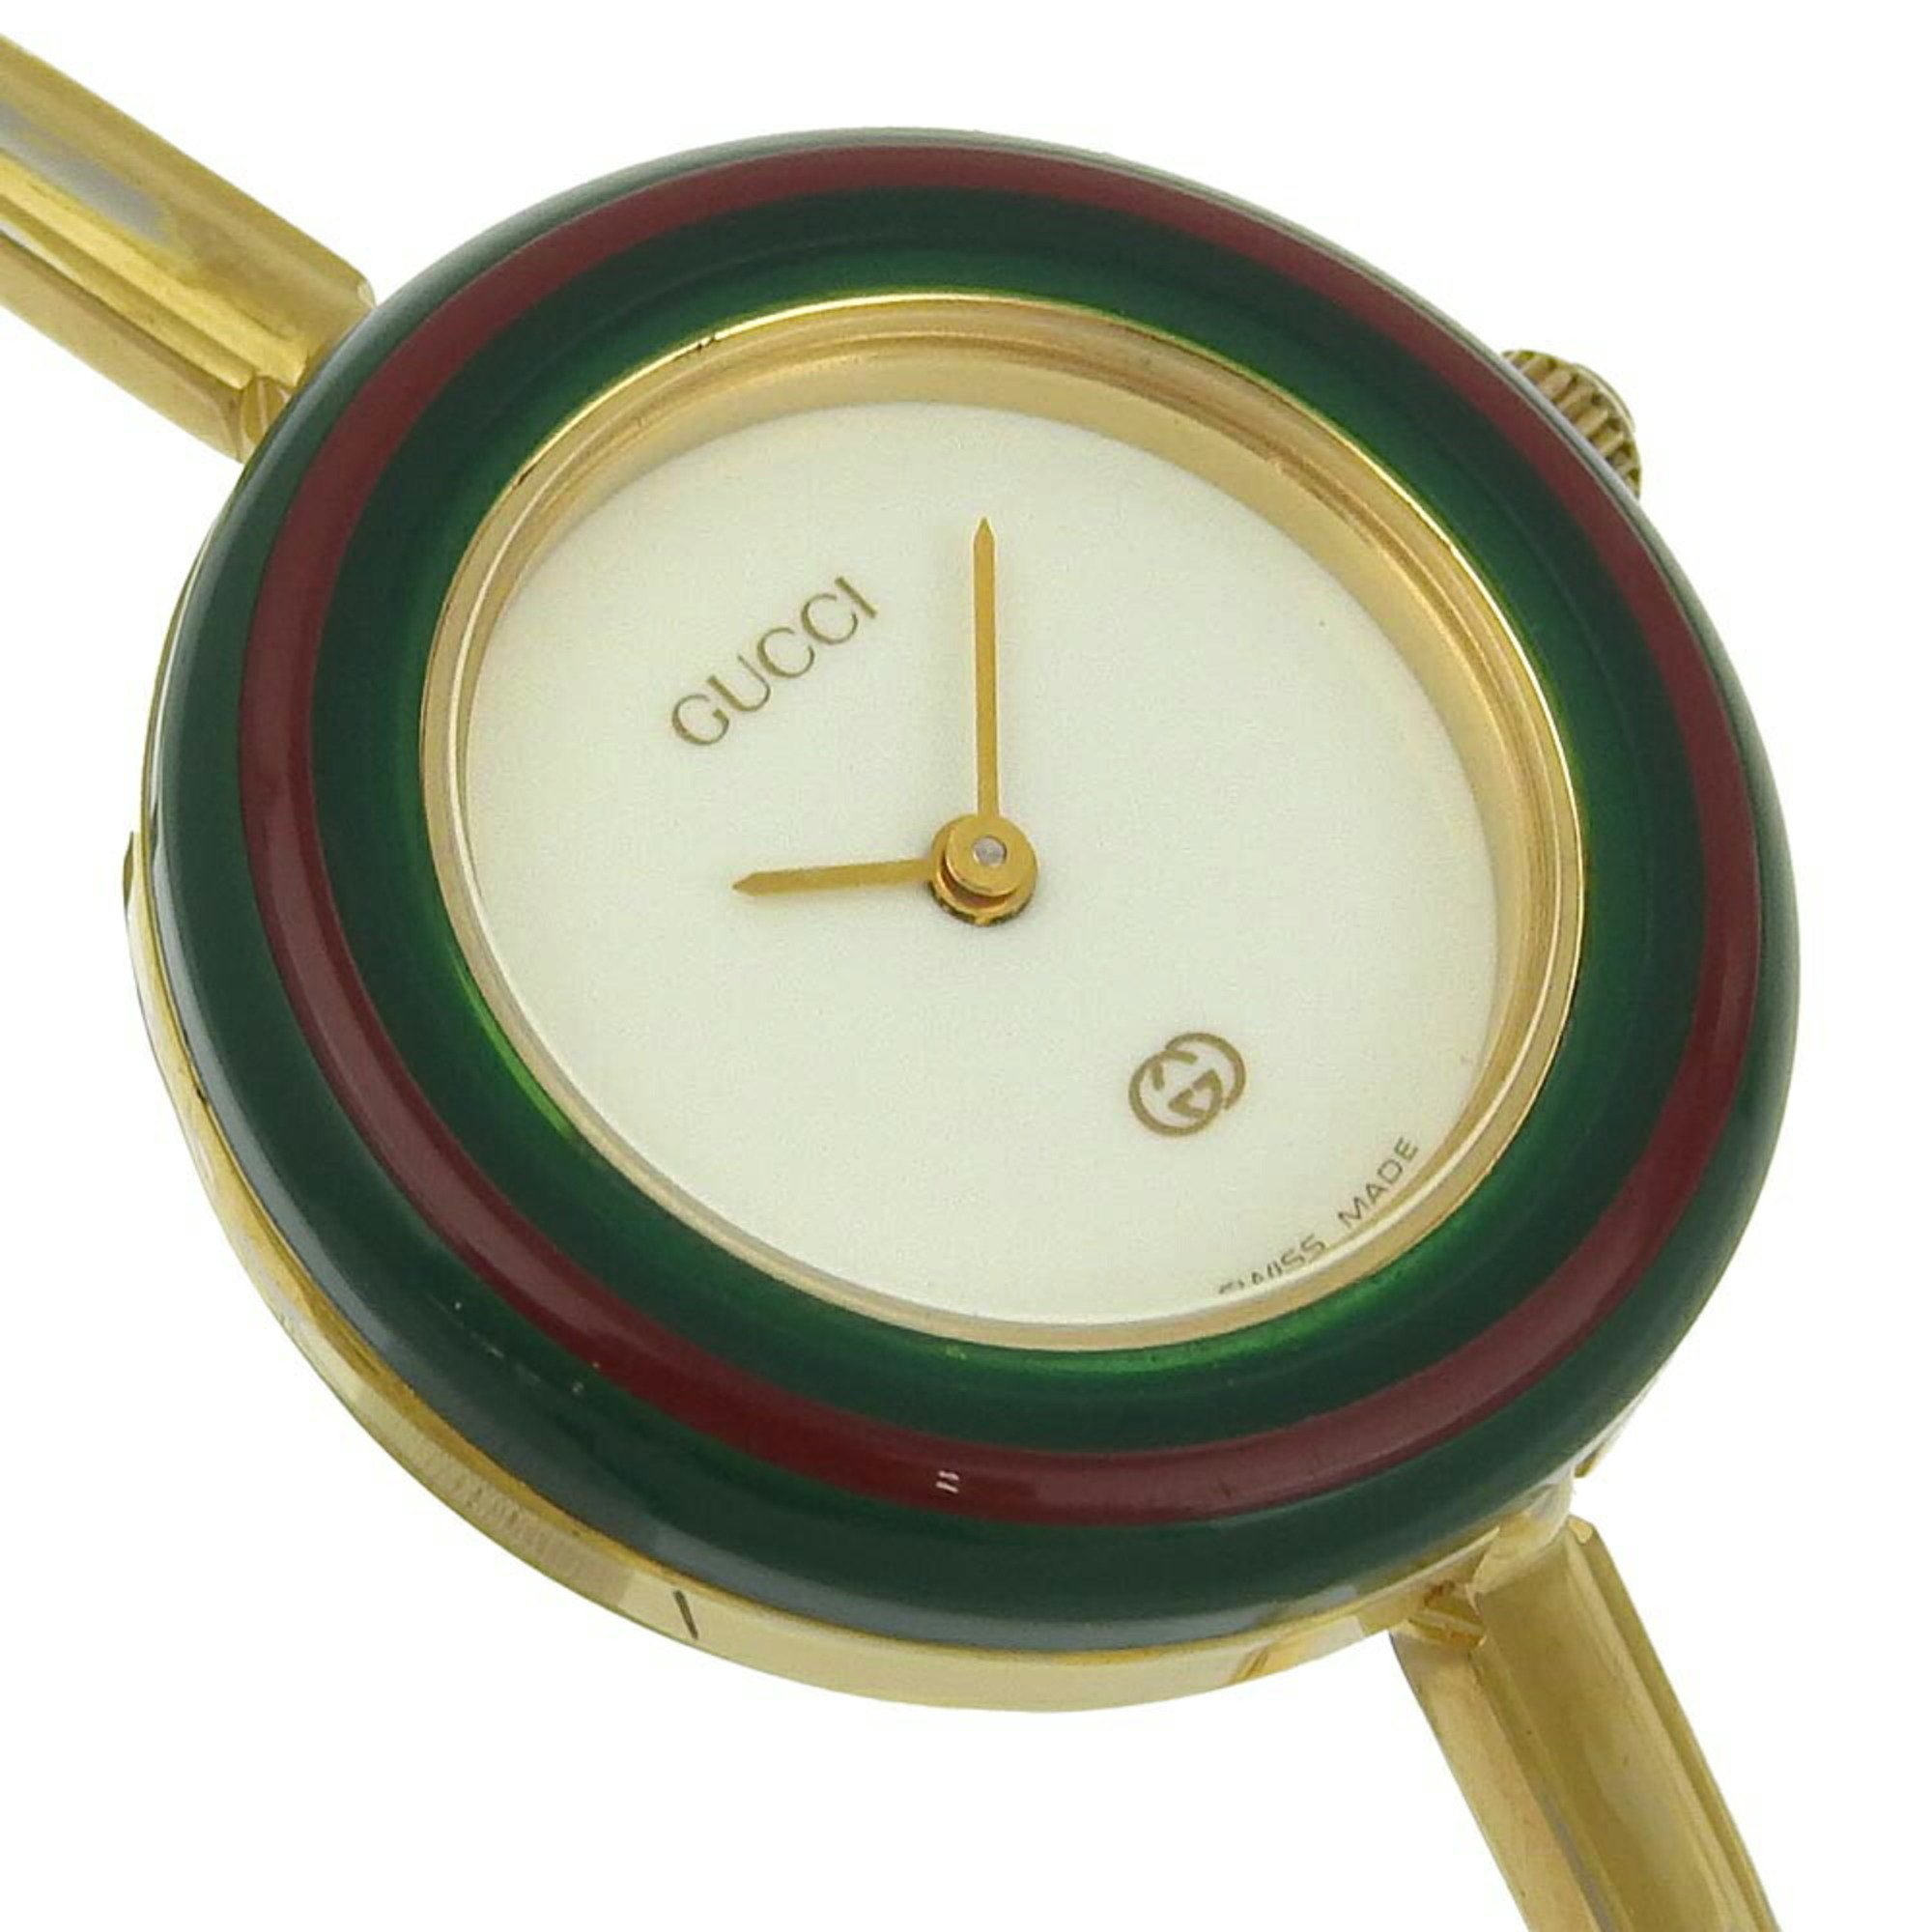 GUCCI Change Bezel Watch 11/12 Gold Plated Swiss Made Quartz Analog Display White Dial Ladies